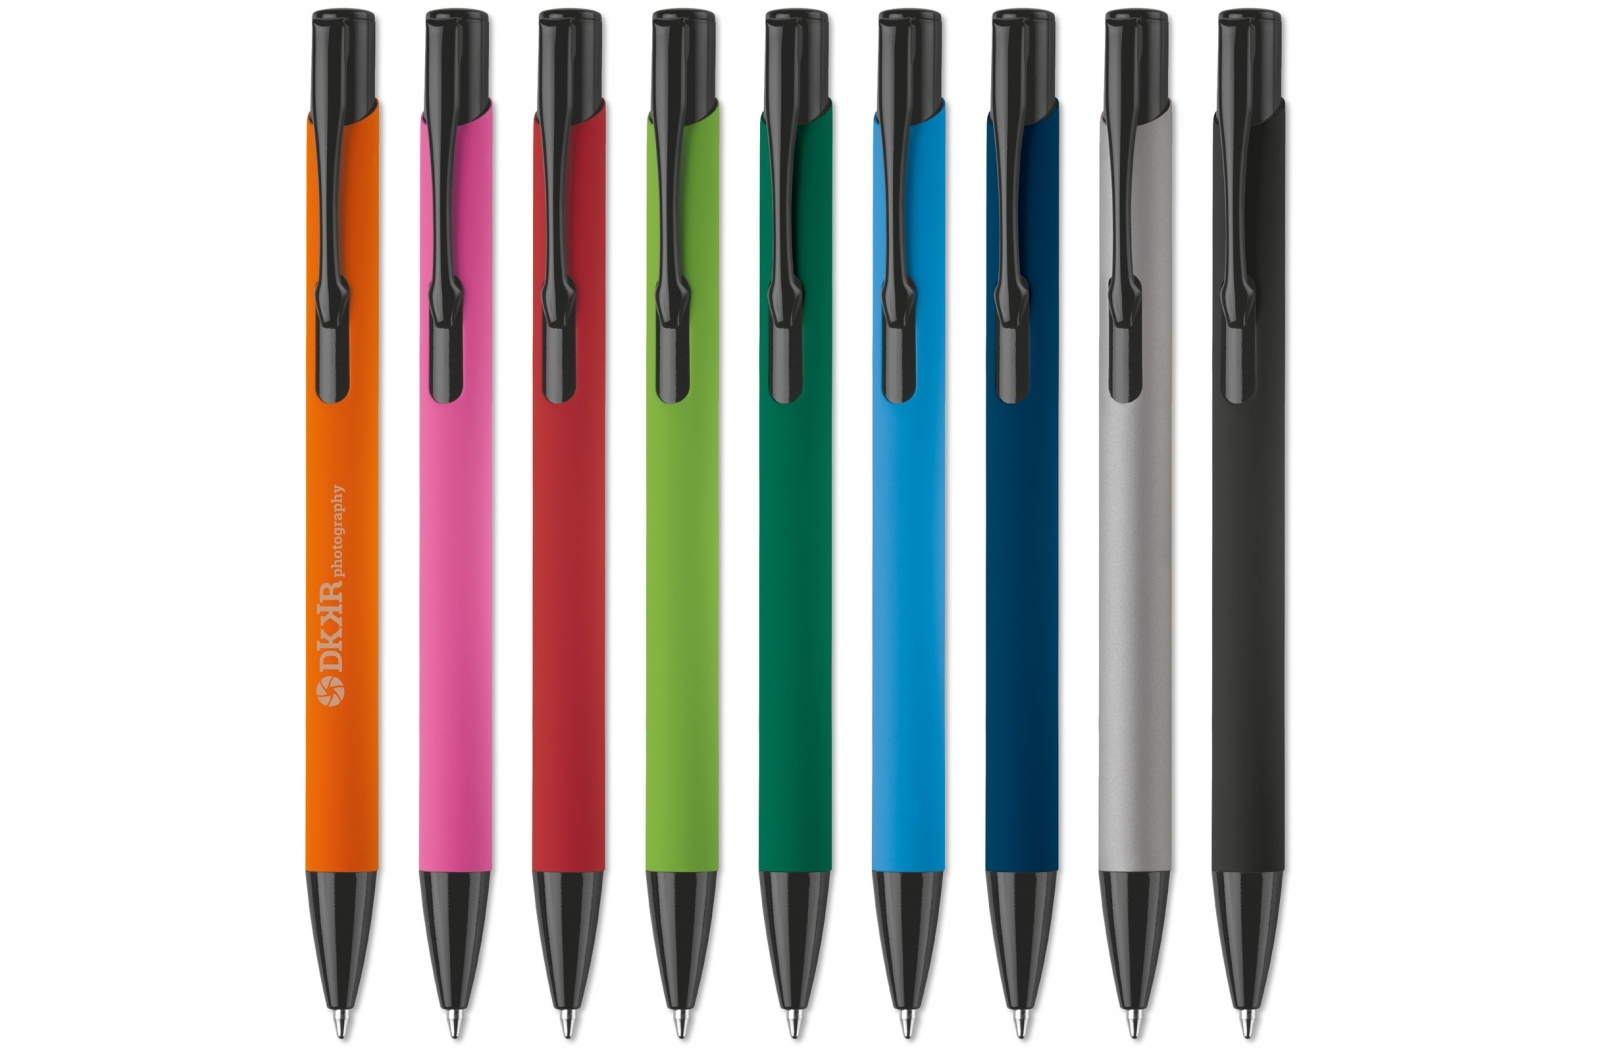 Stylo soft touch